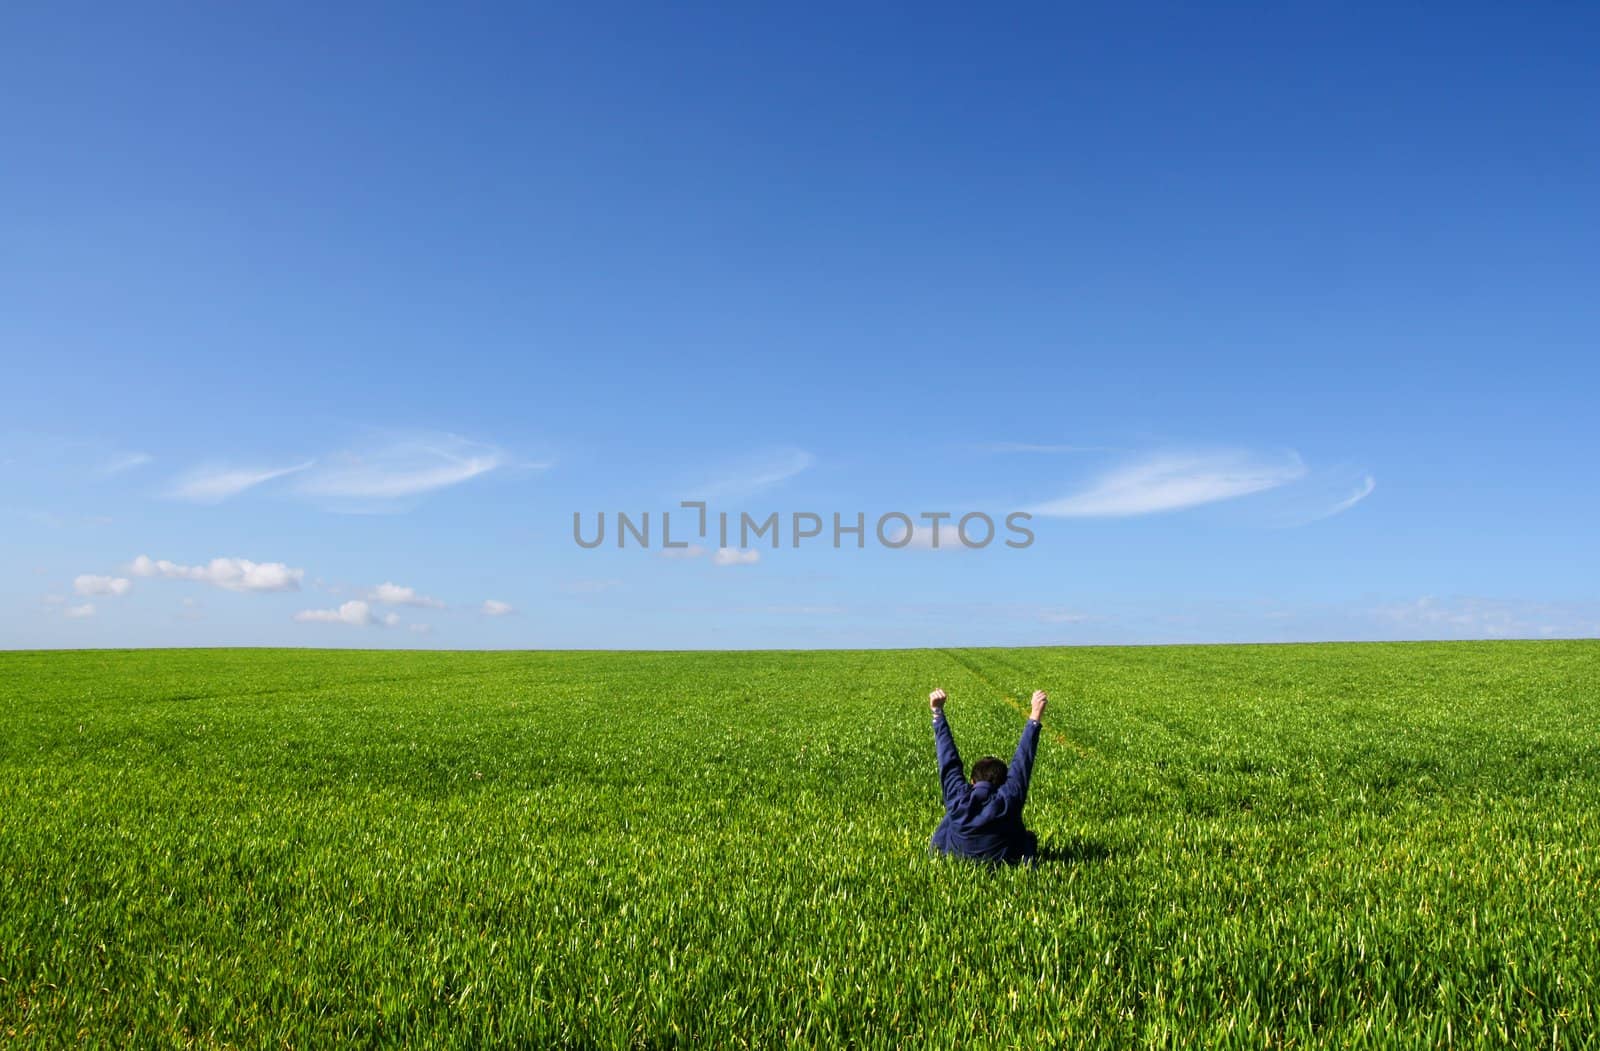 A man sitting alone in a green field, with lifted V arms